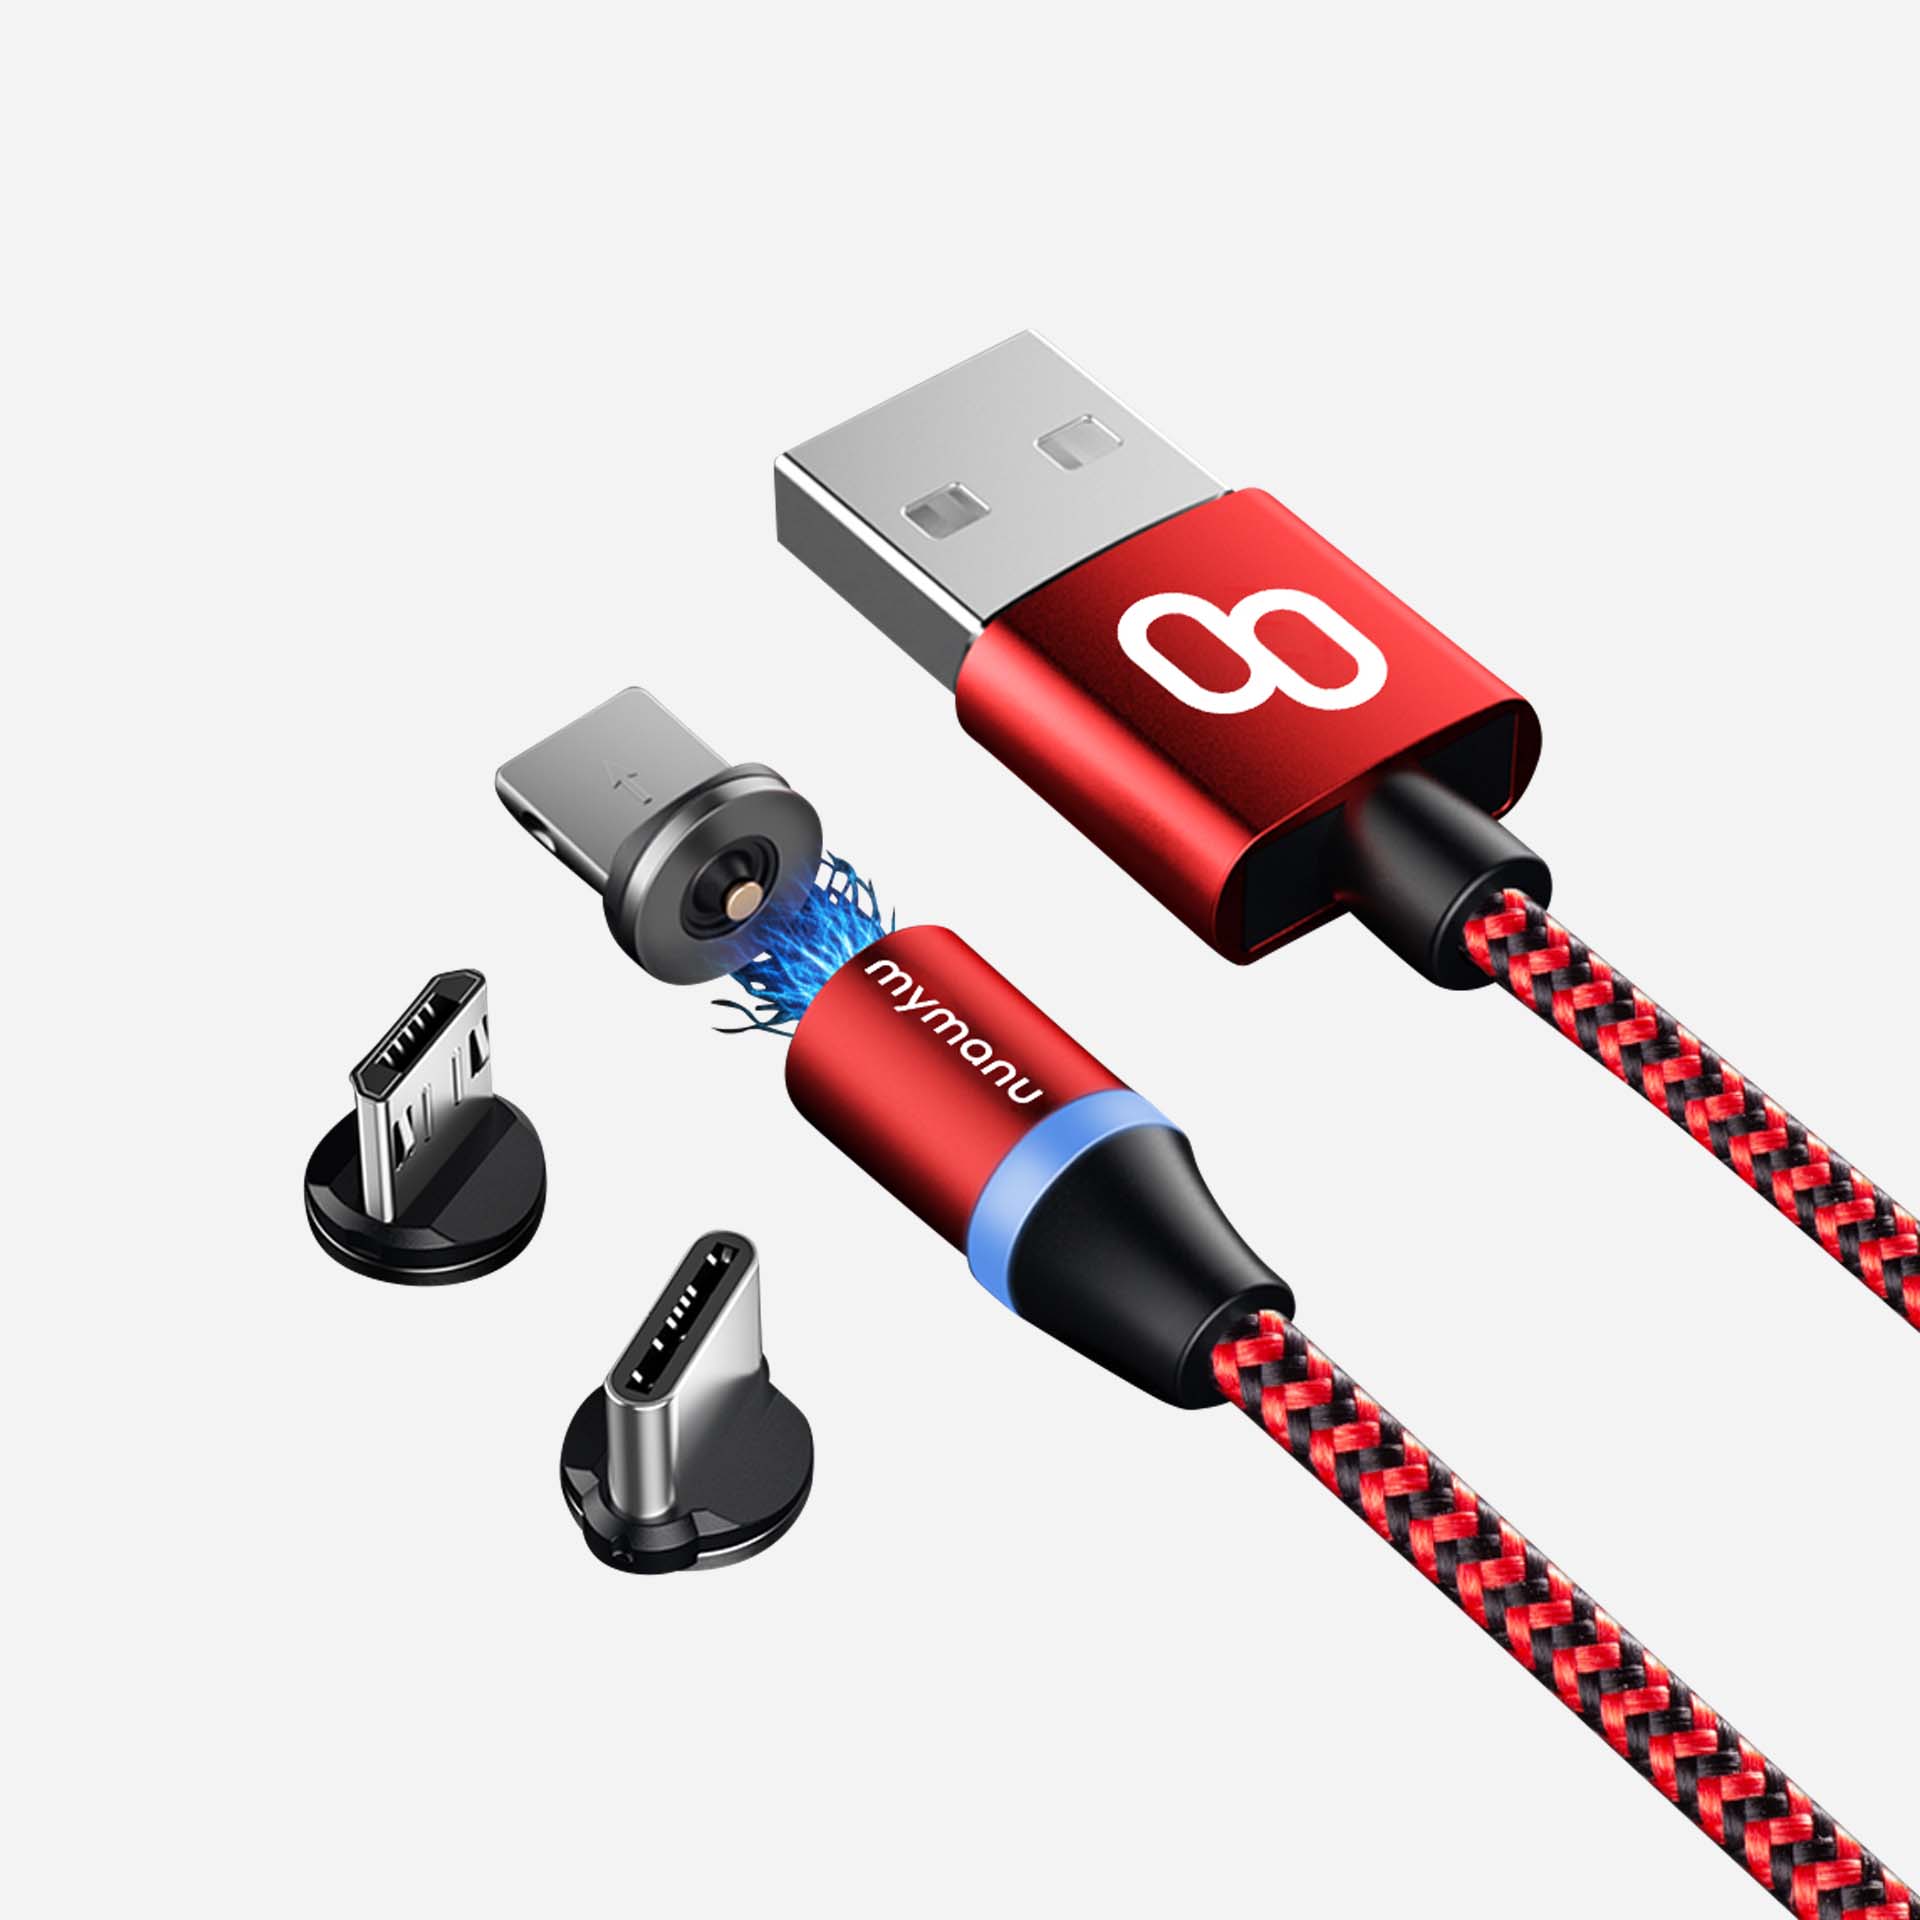 Genius 3 magnetic charging cable for Both IOS &Android –